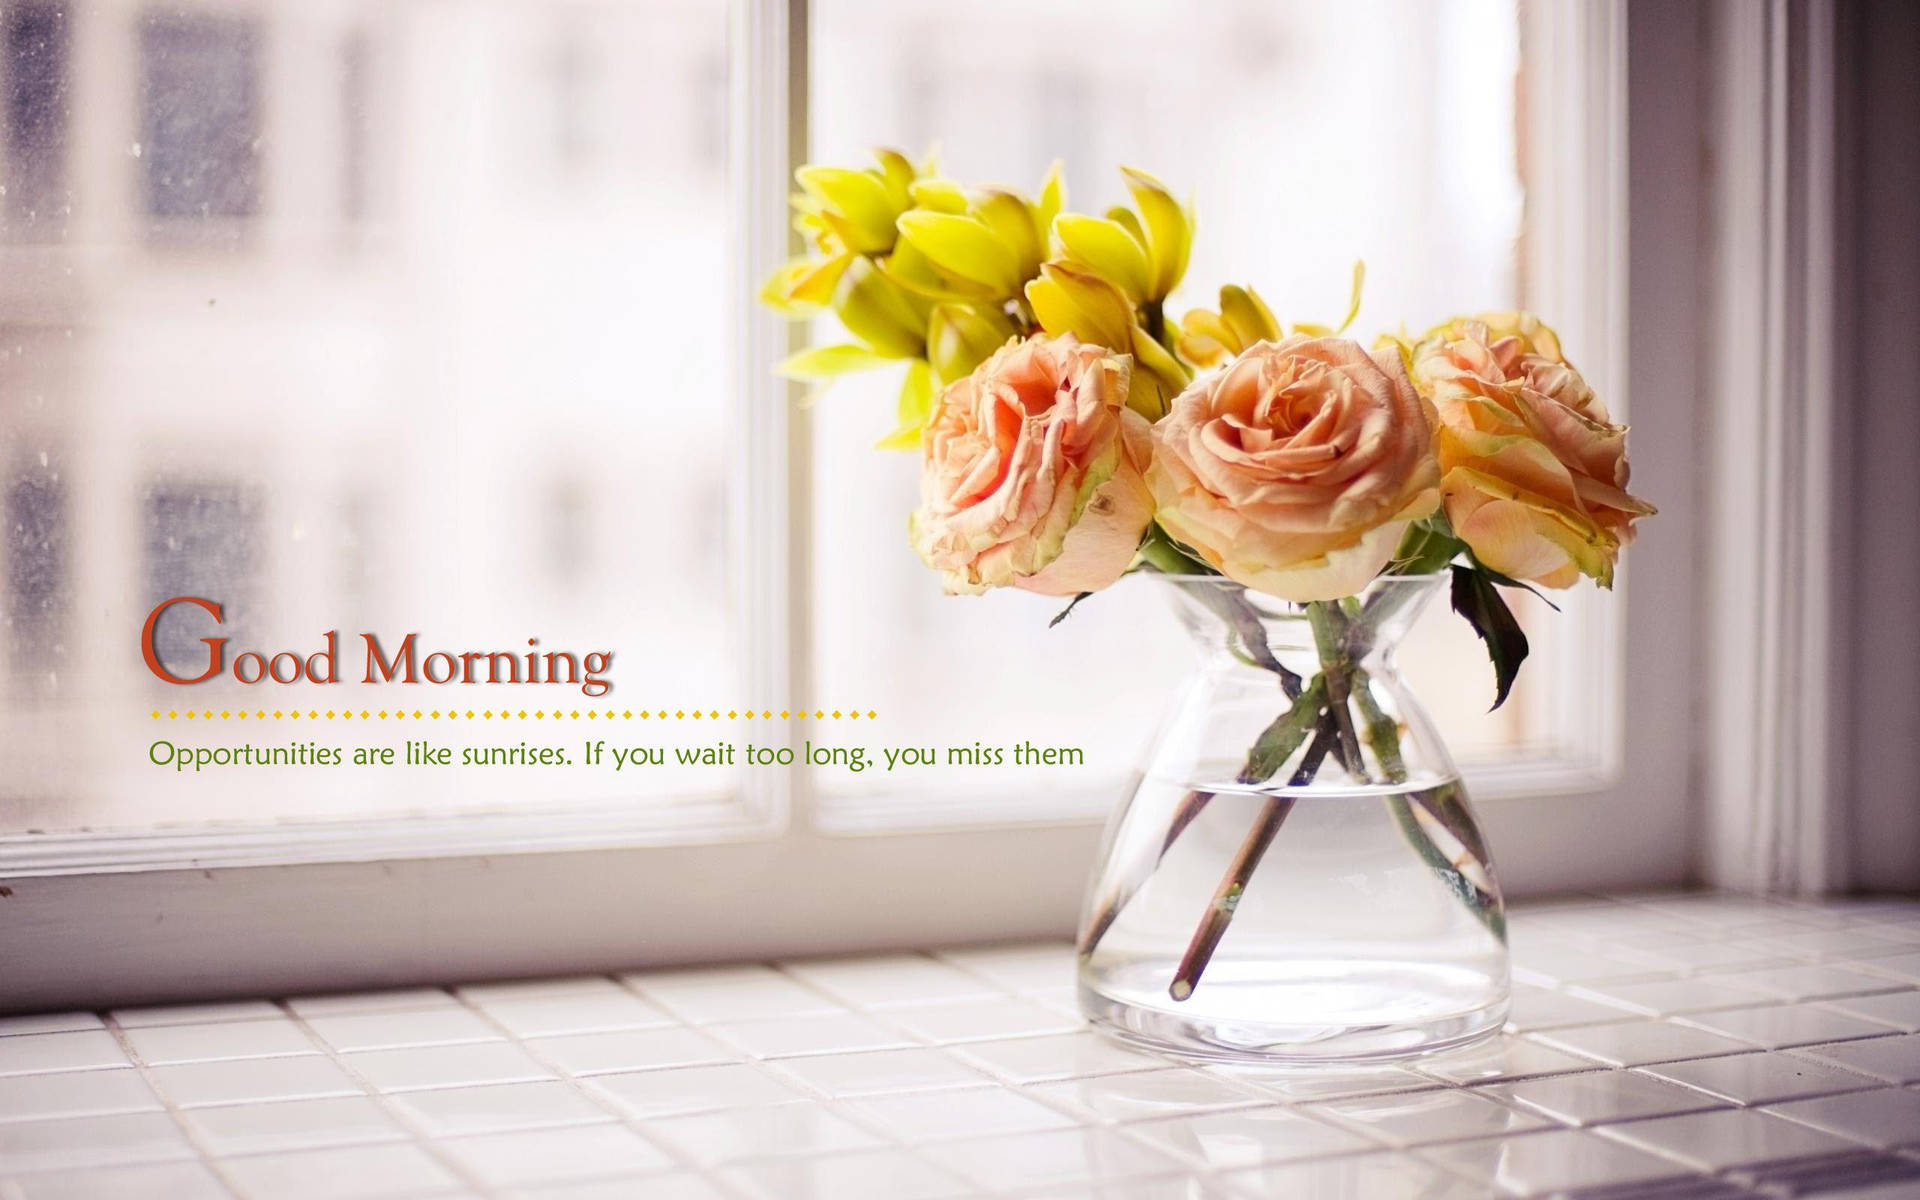 Good Morning HD With Flower Bouquet Wallpaper